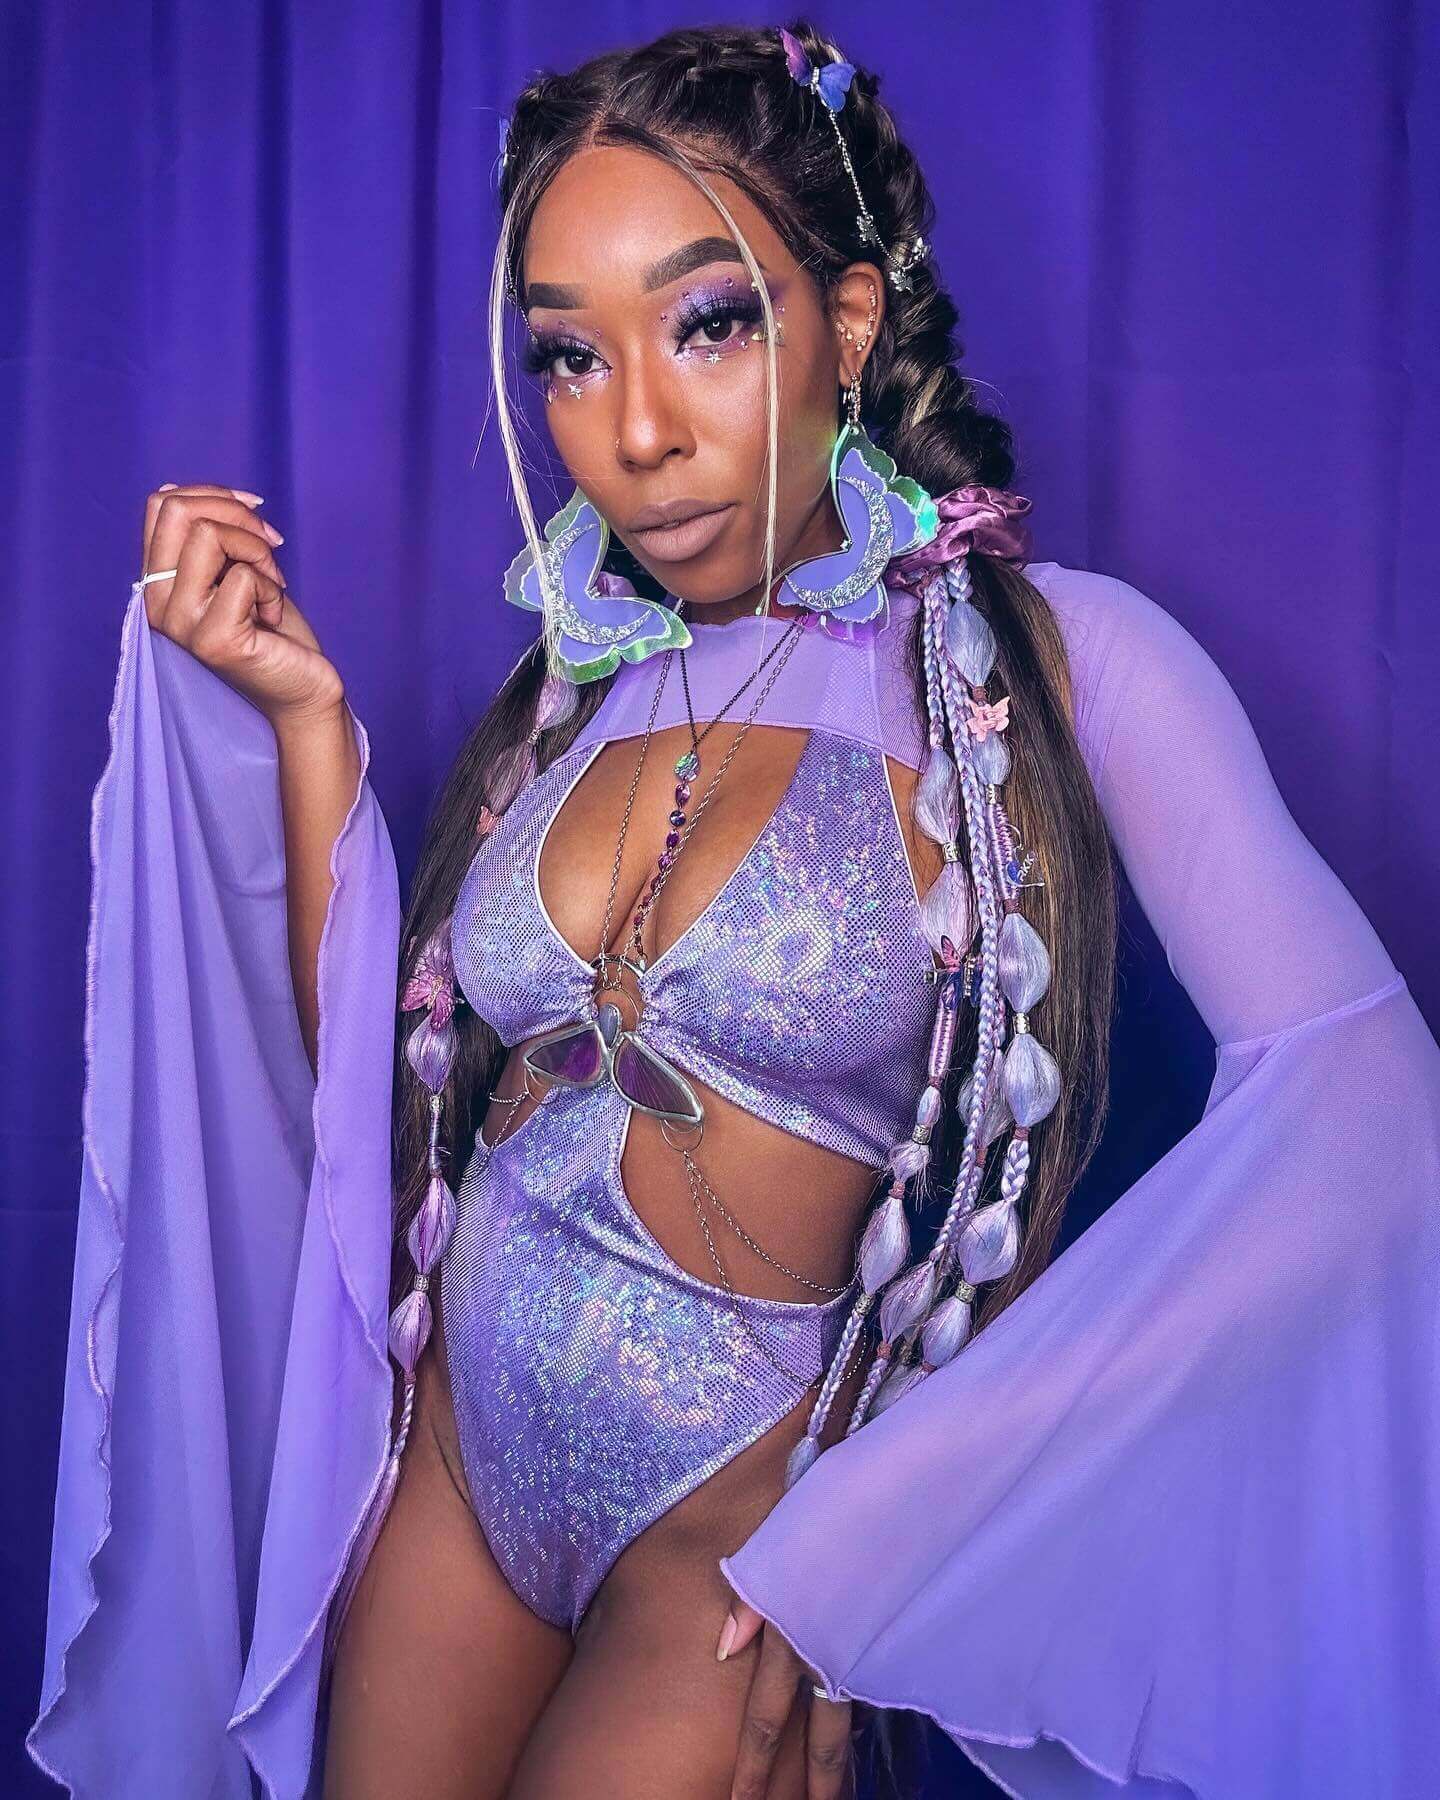 Poc rave girl poses with a mystical aura in a sparkling lilac rave set, complemented by lavender backdrop